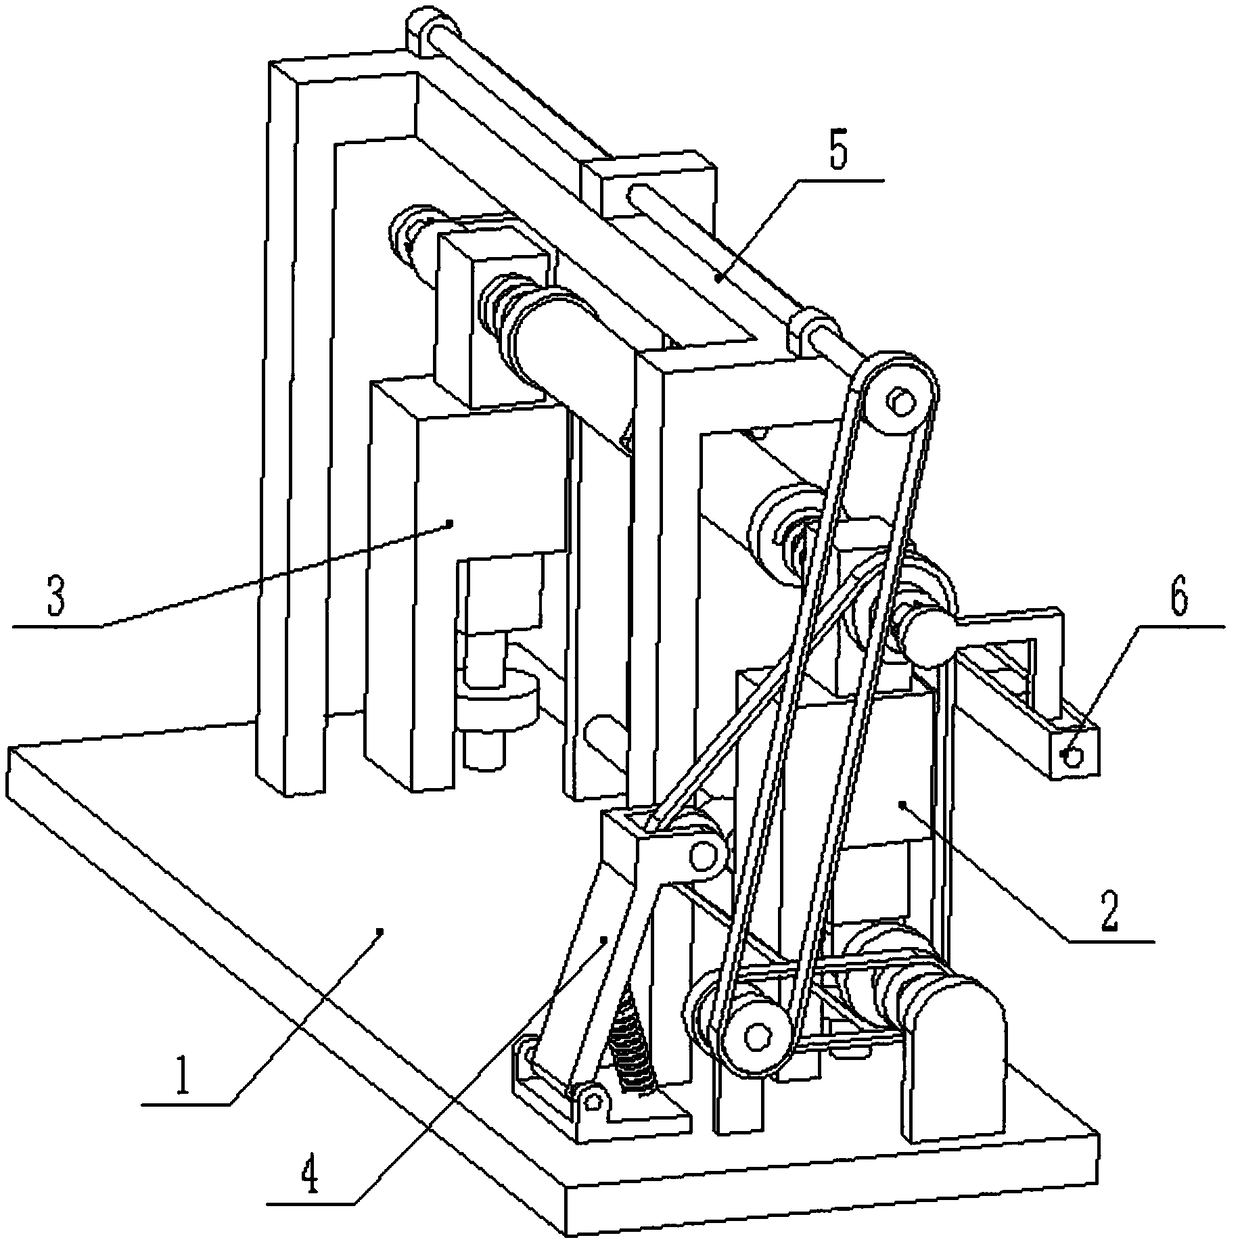 Pipeline grinding device for building construction